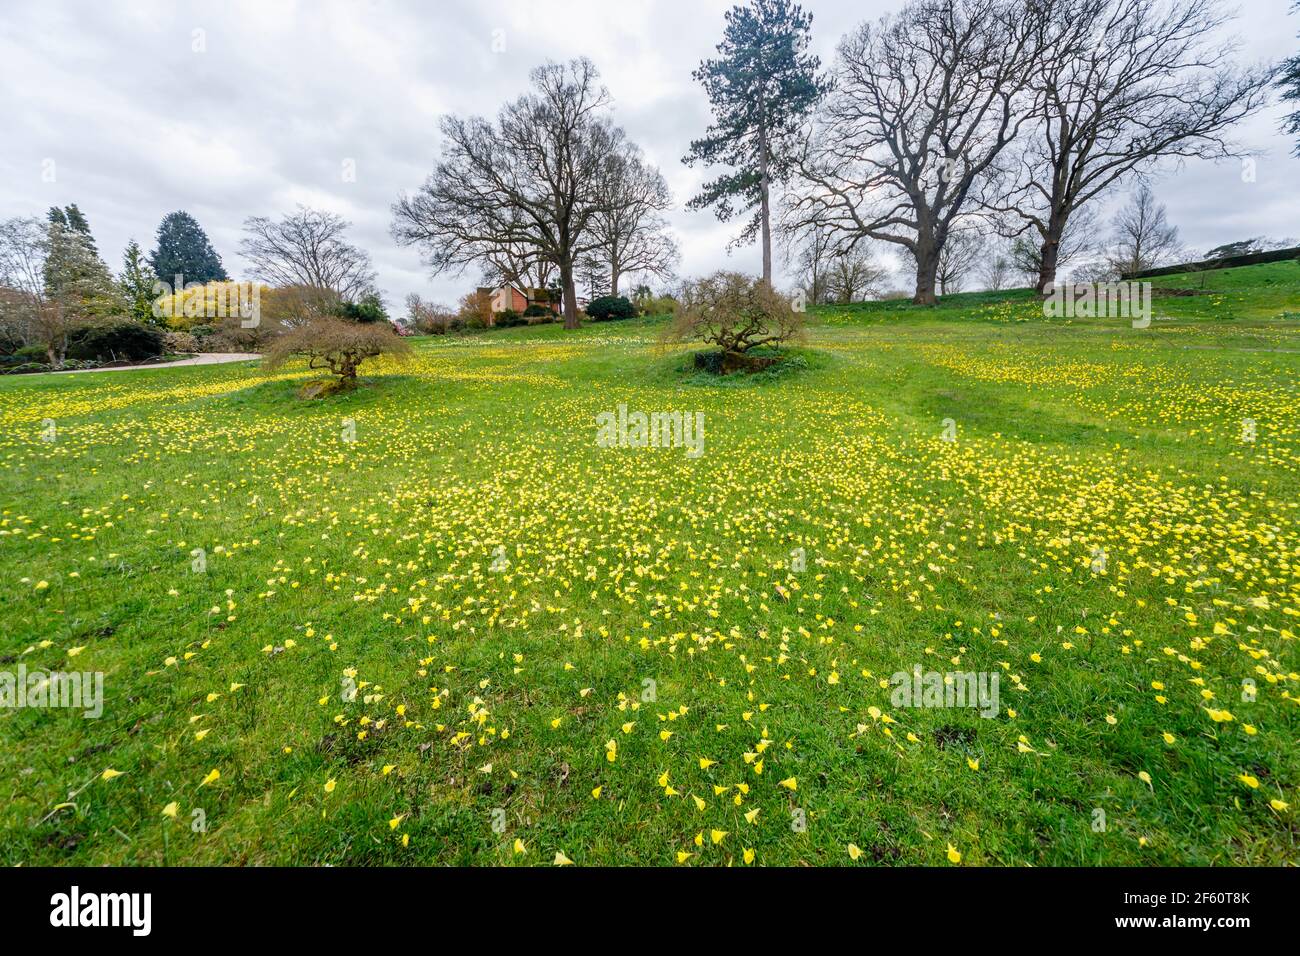 View of the Alpine Meadow with hooped-petticoat daffodils (Narcissus bulbocodium) flowering at RHS Garden Wisley, Surrey, south-east England in spring Stock Photo